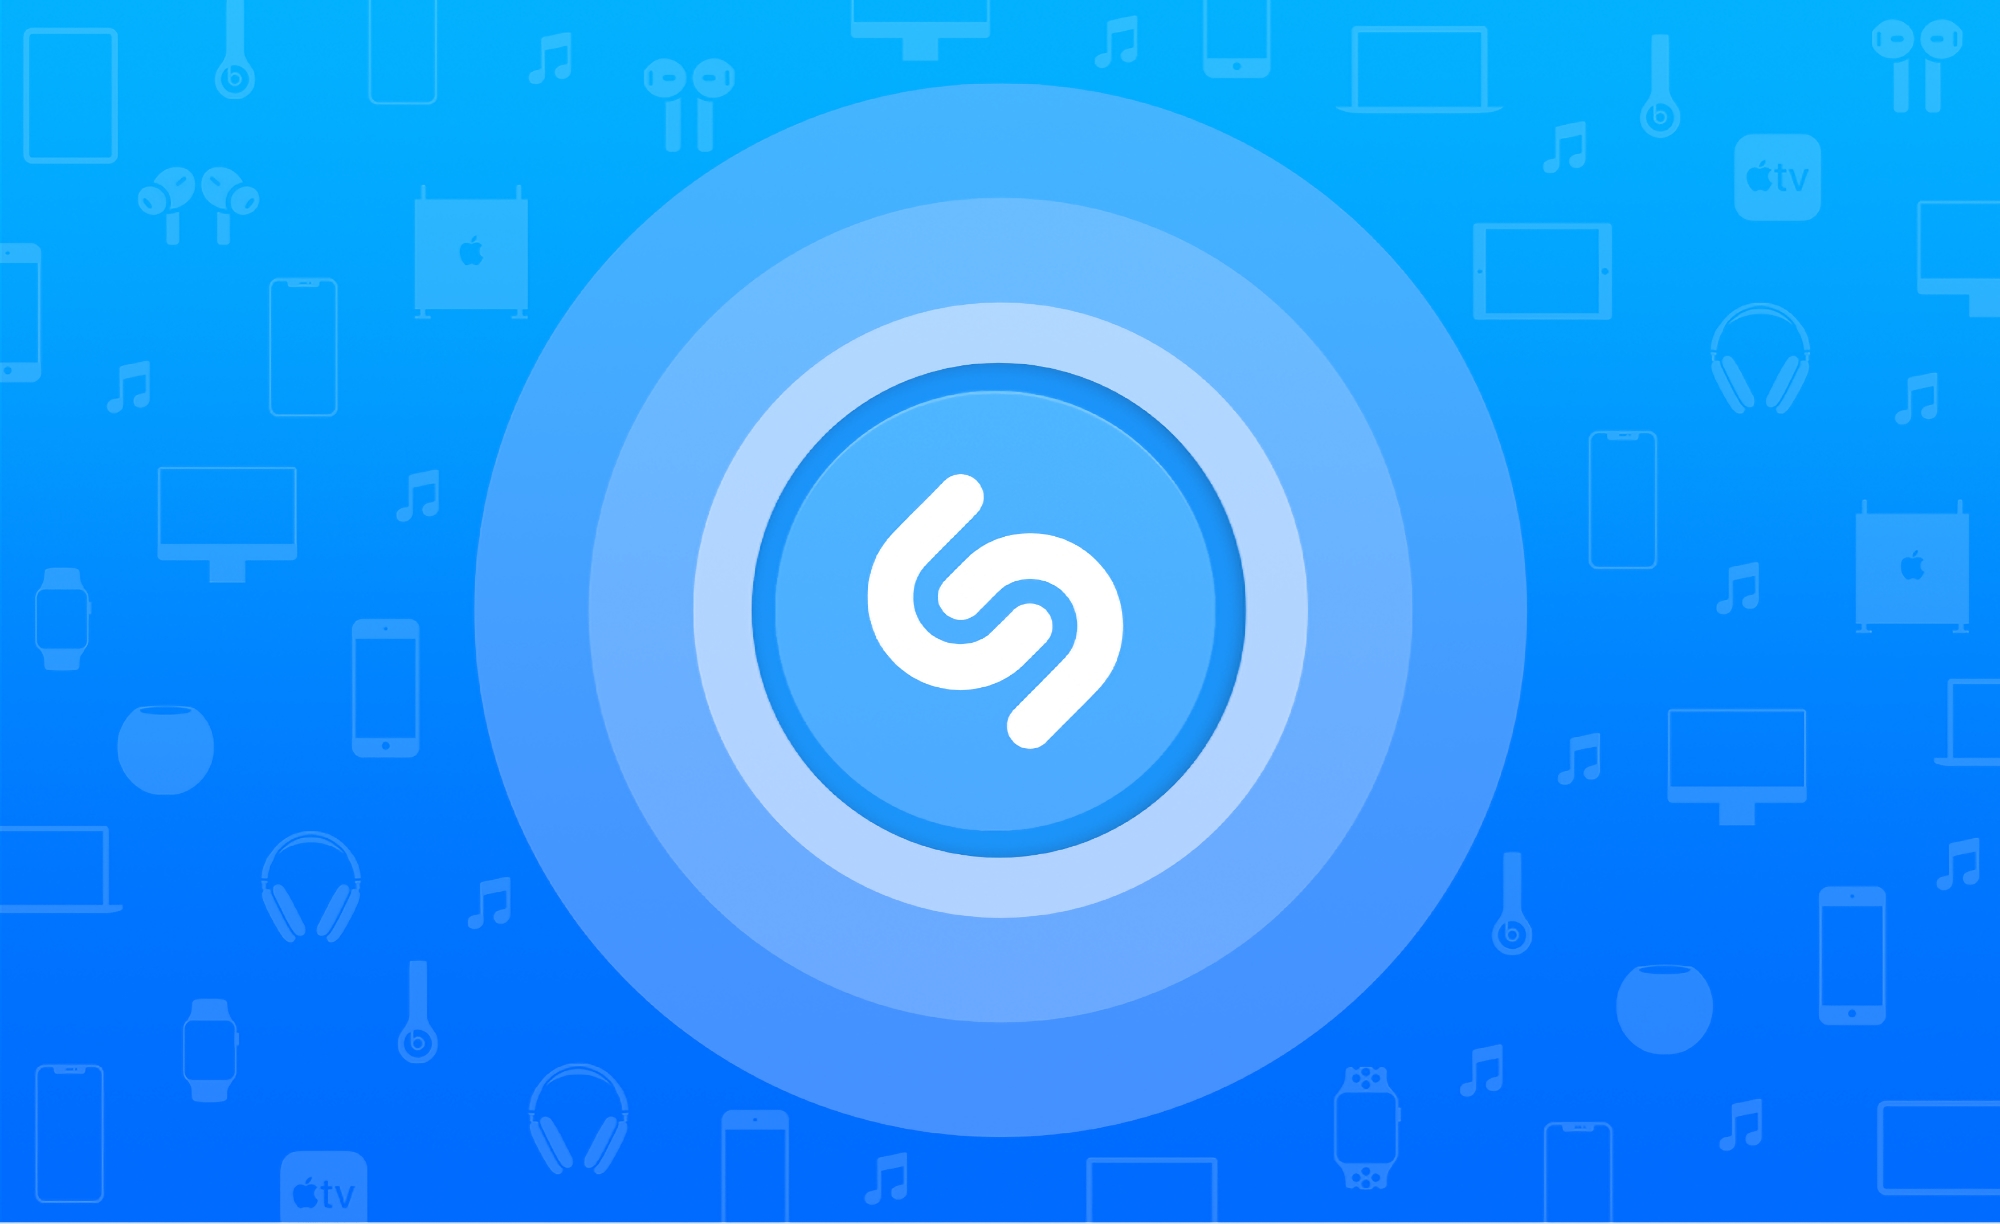 iPhone and iPad users can now use Shazam to identify songs in apps without removing their headphones